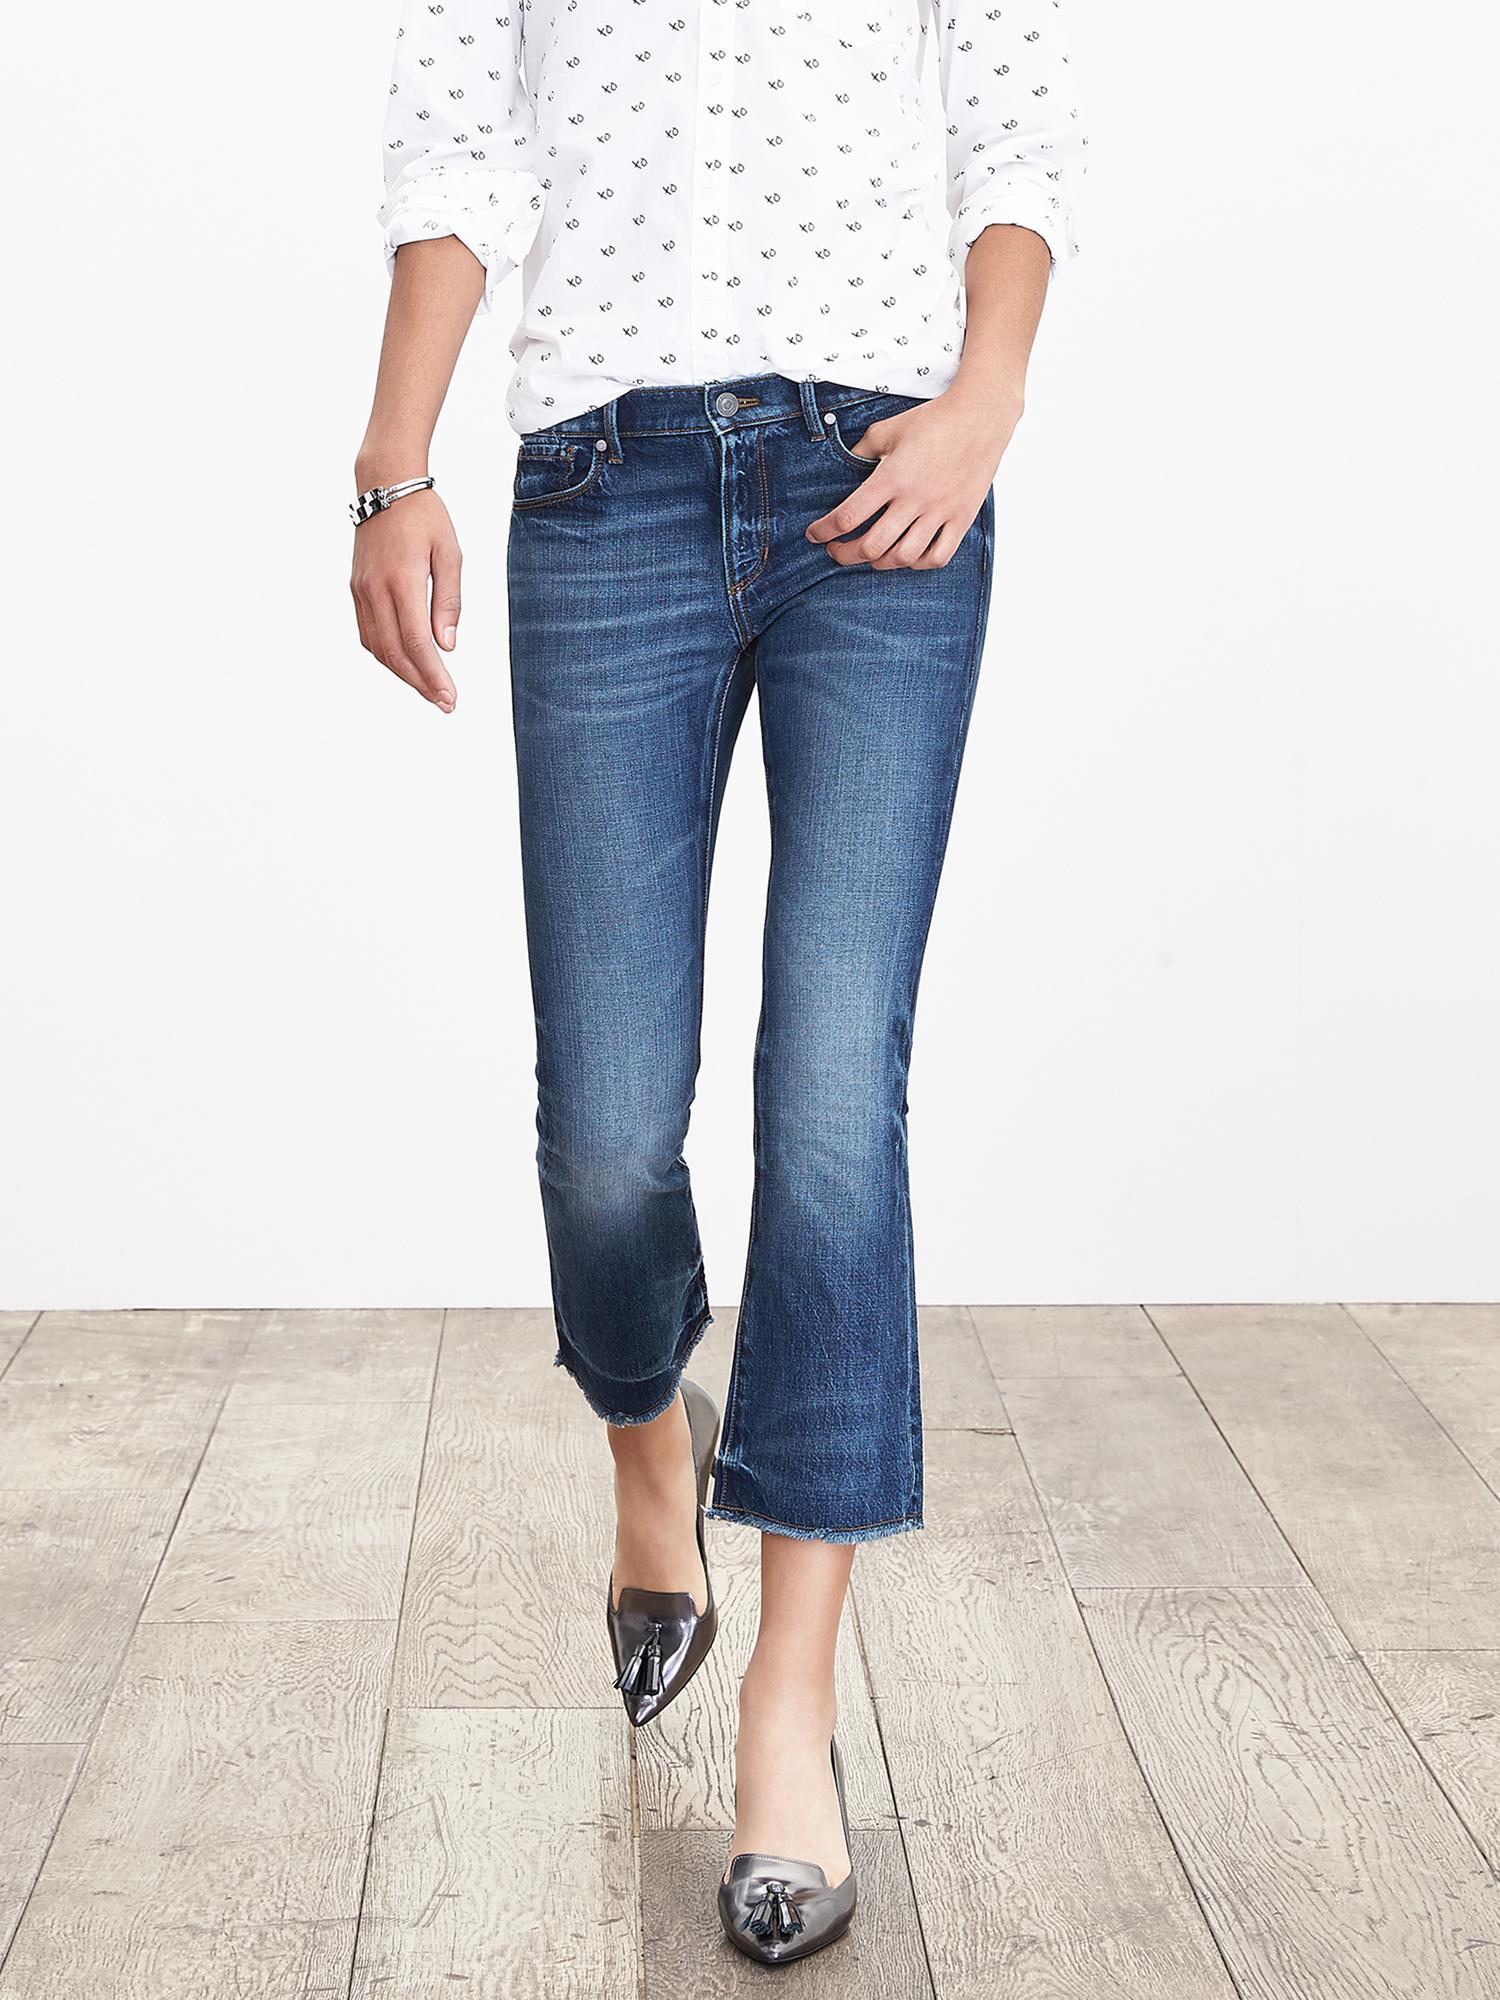 Cropped Kick Flare Jeans for Petites? – Small Town Threads